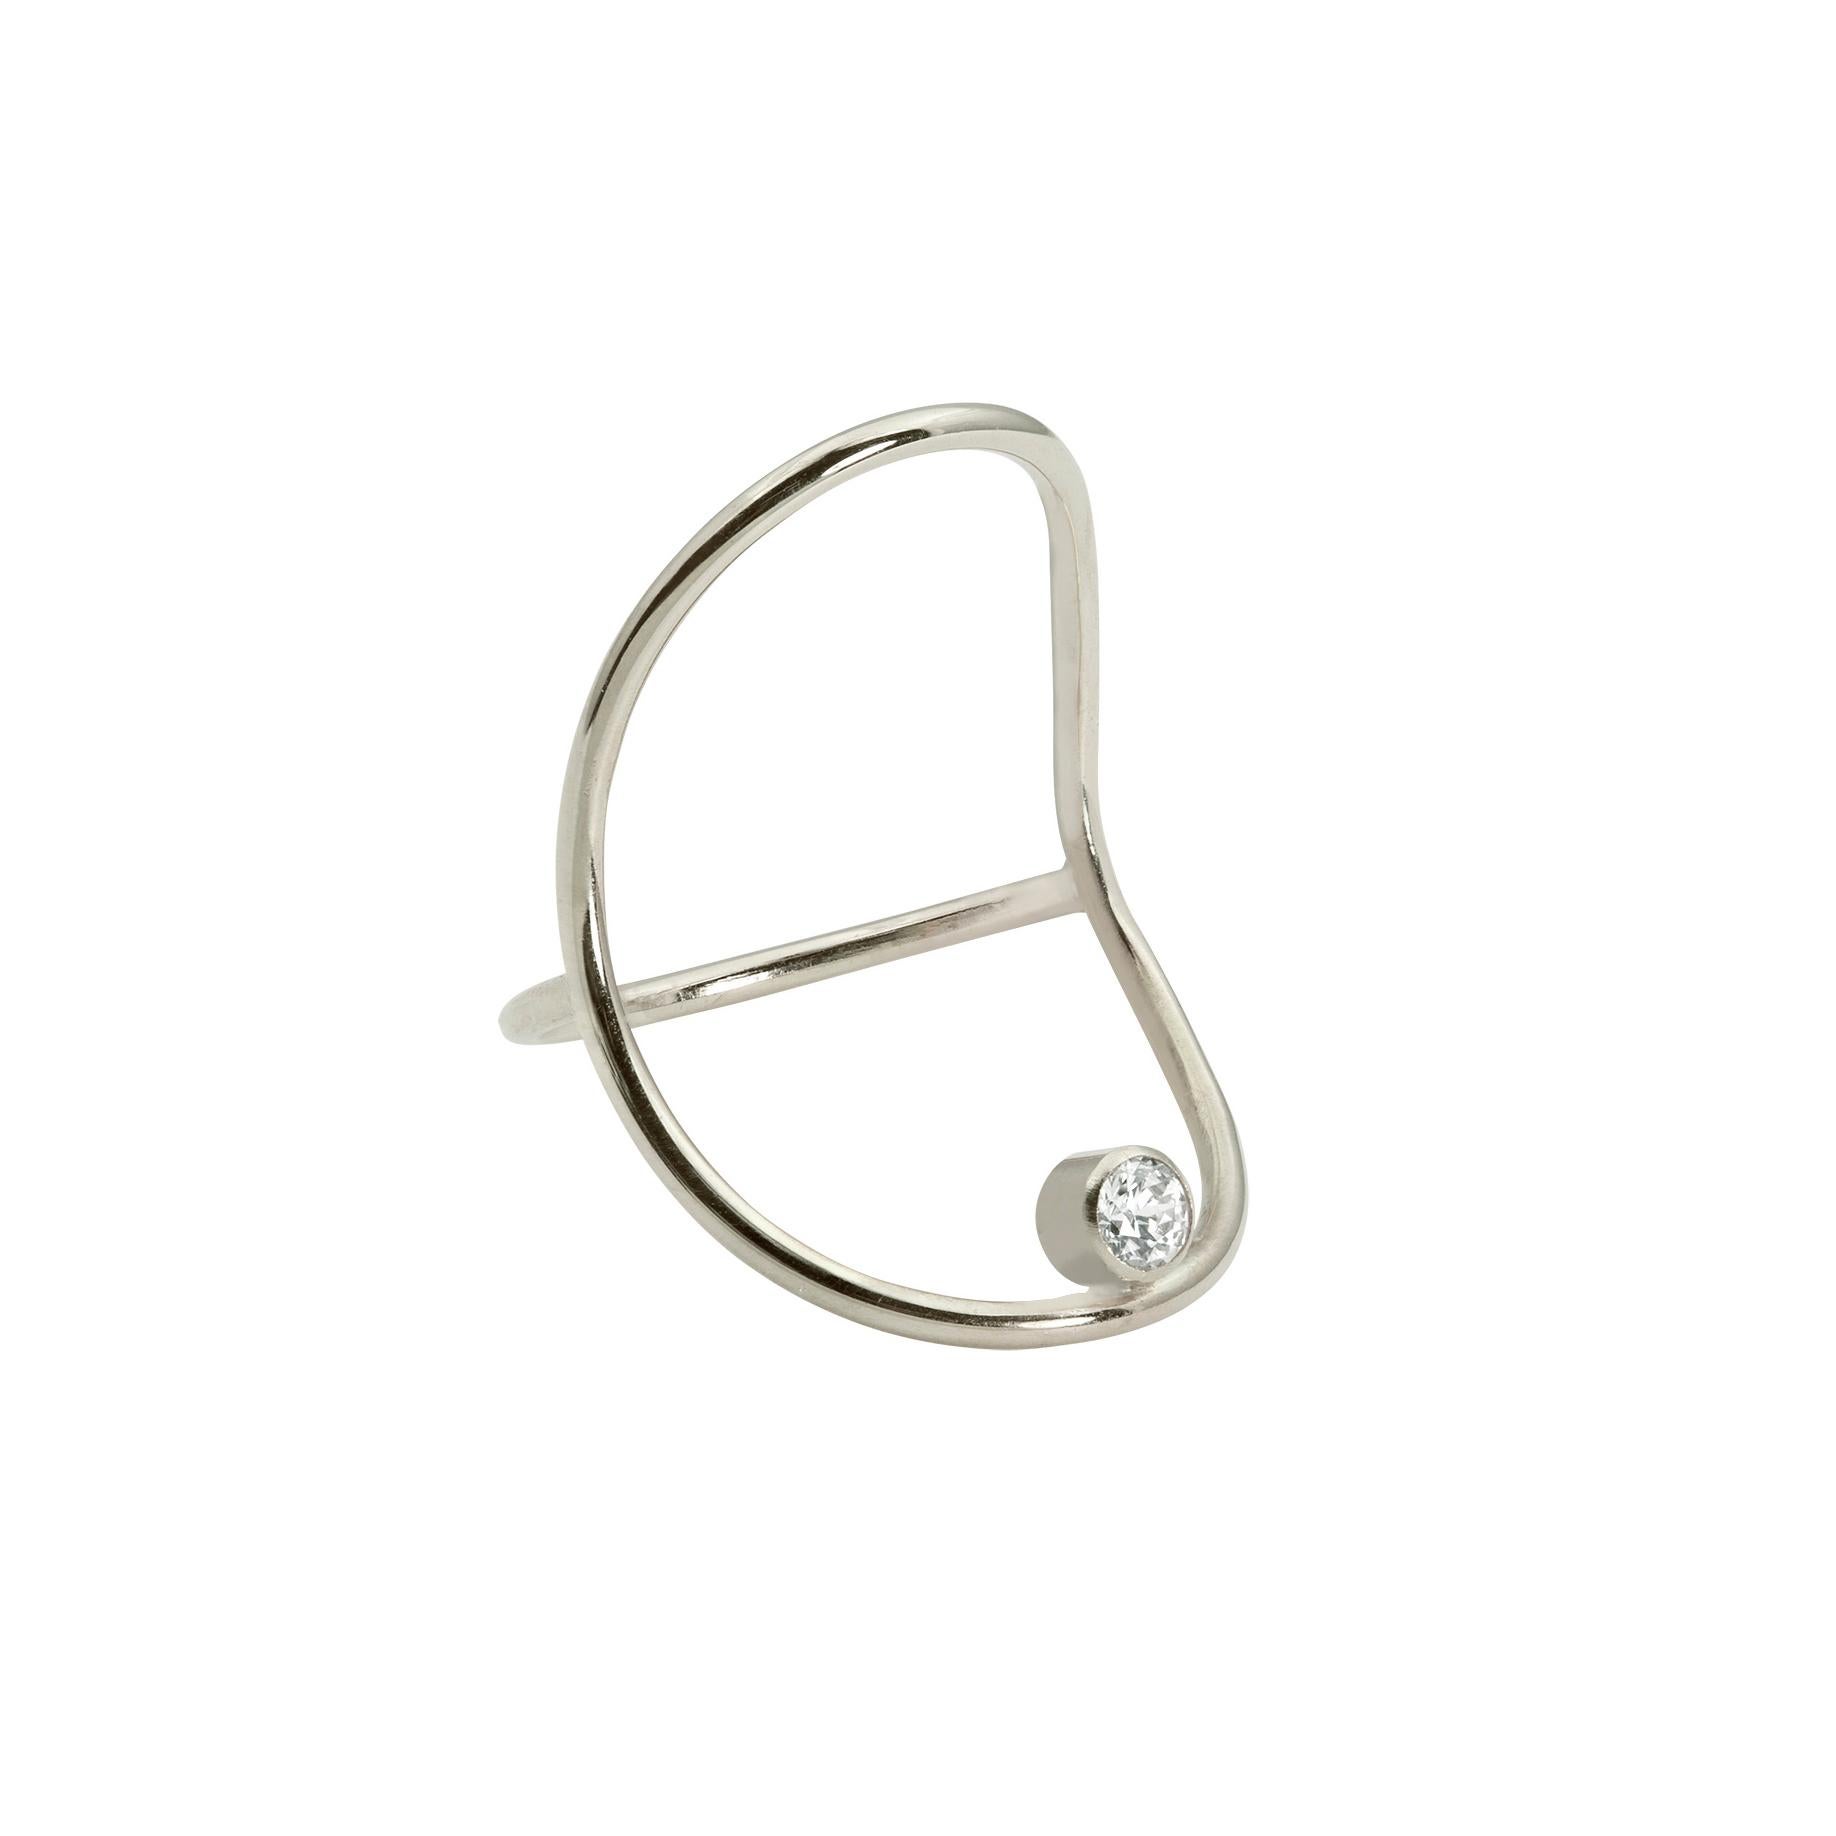 An elegant hand-formed solid 14k gold oval holds a brilliant white .10ct diamond (3mm) that seems to float on the finger.  It's bold and delicate at the same time - minimal with a bit of surrealist magic, and it's streamlined design makes it very